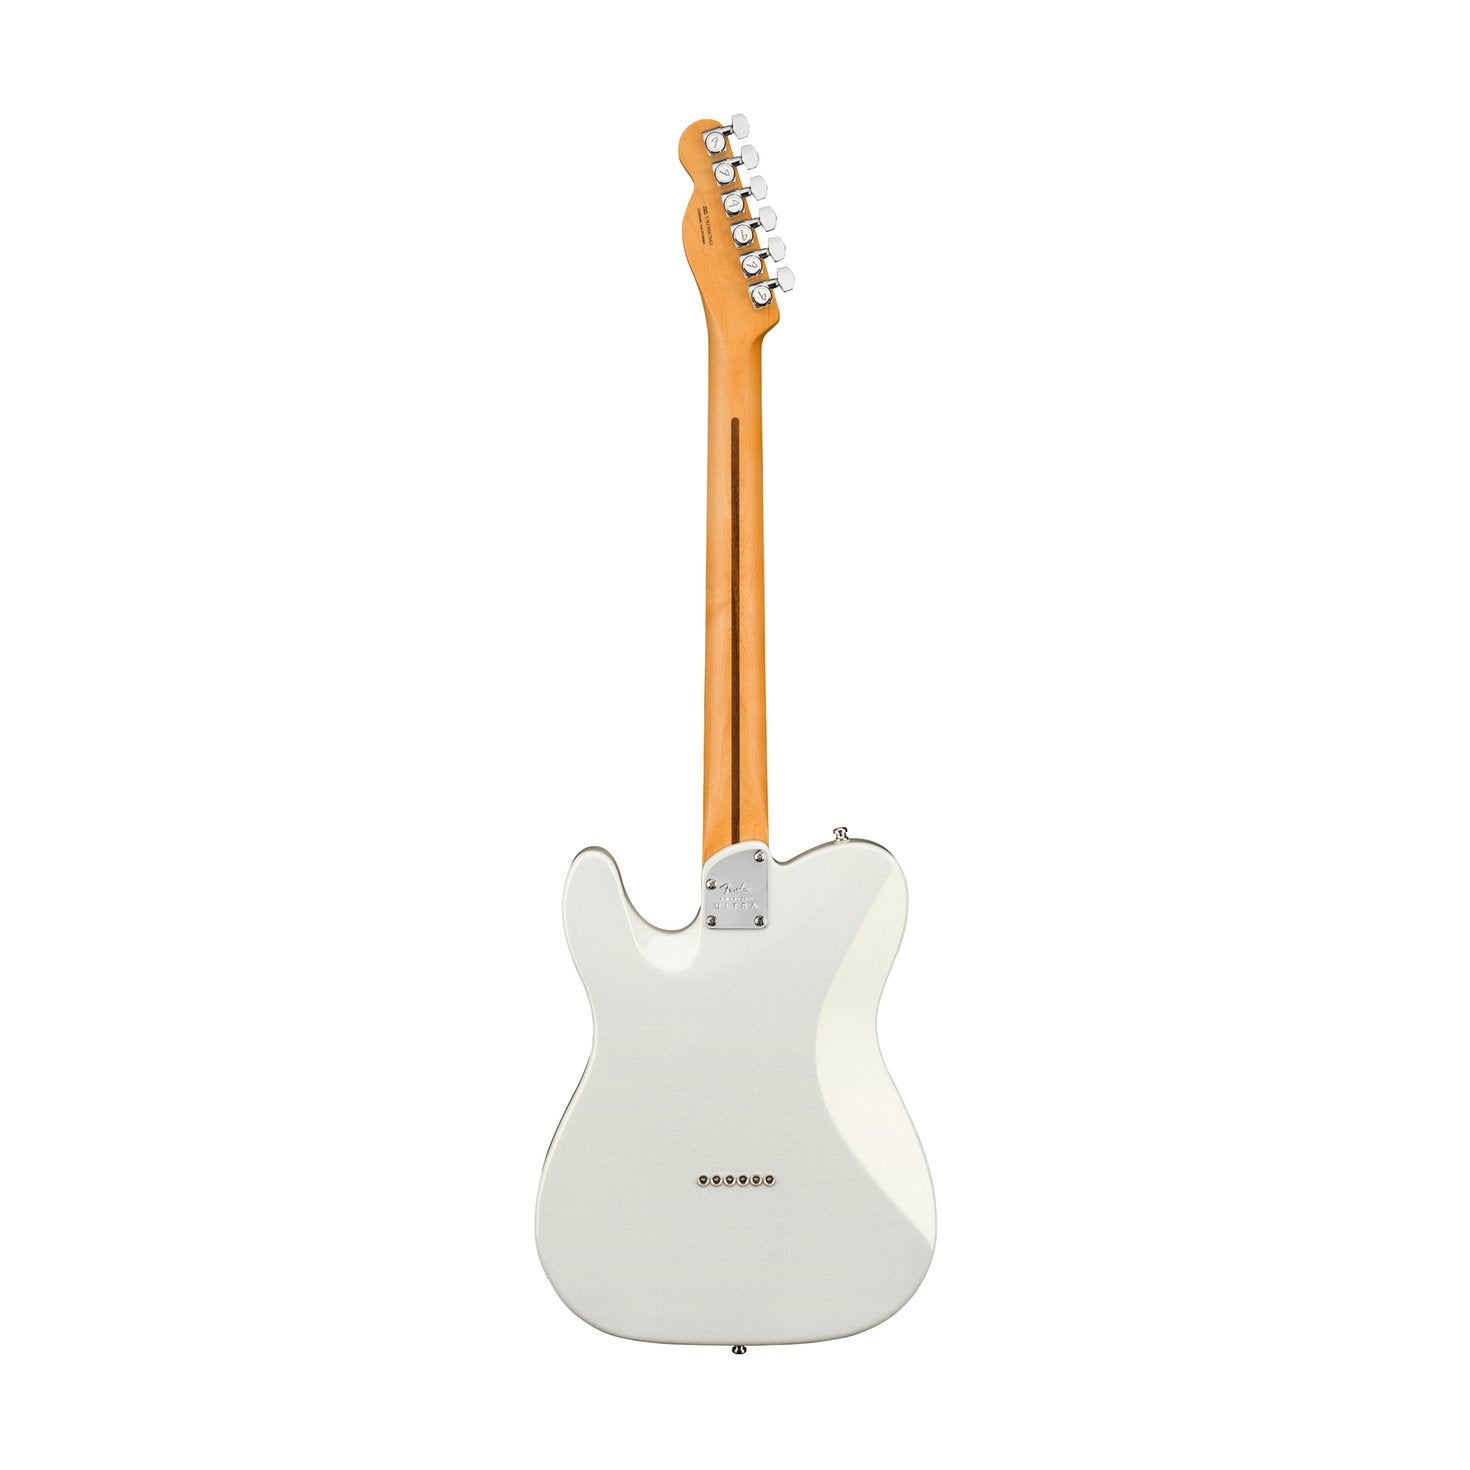 Fender American Ultra Telecaster Electric Guitar, RW FB, Arctic Pearl, FENDER, ELECTRIC GUITAR, fender-electric-guitar-f03-011-8030-781, ZOSO MUSIC SDN BHD